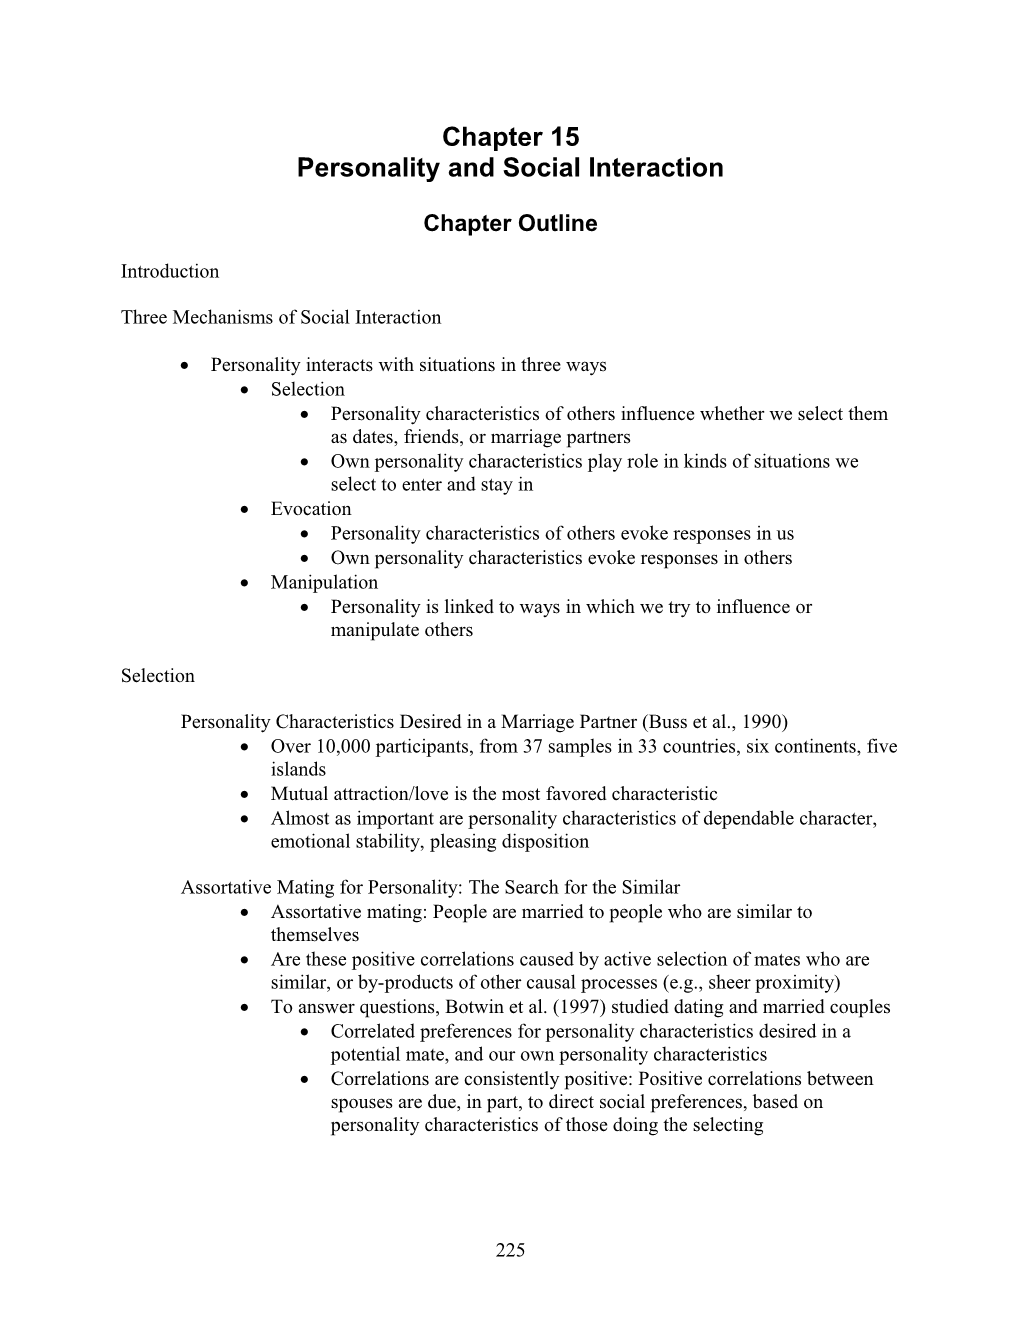 Personality and Social Interaction